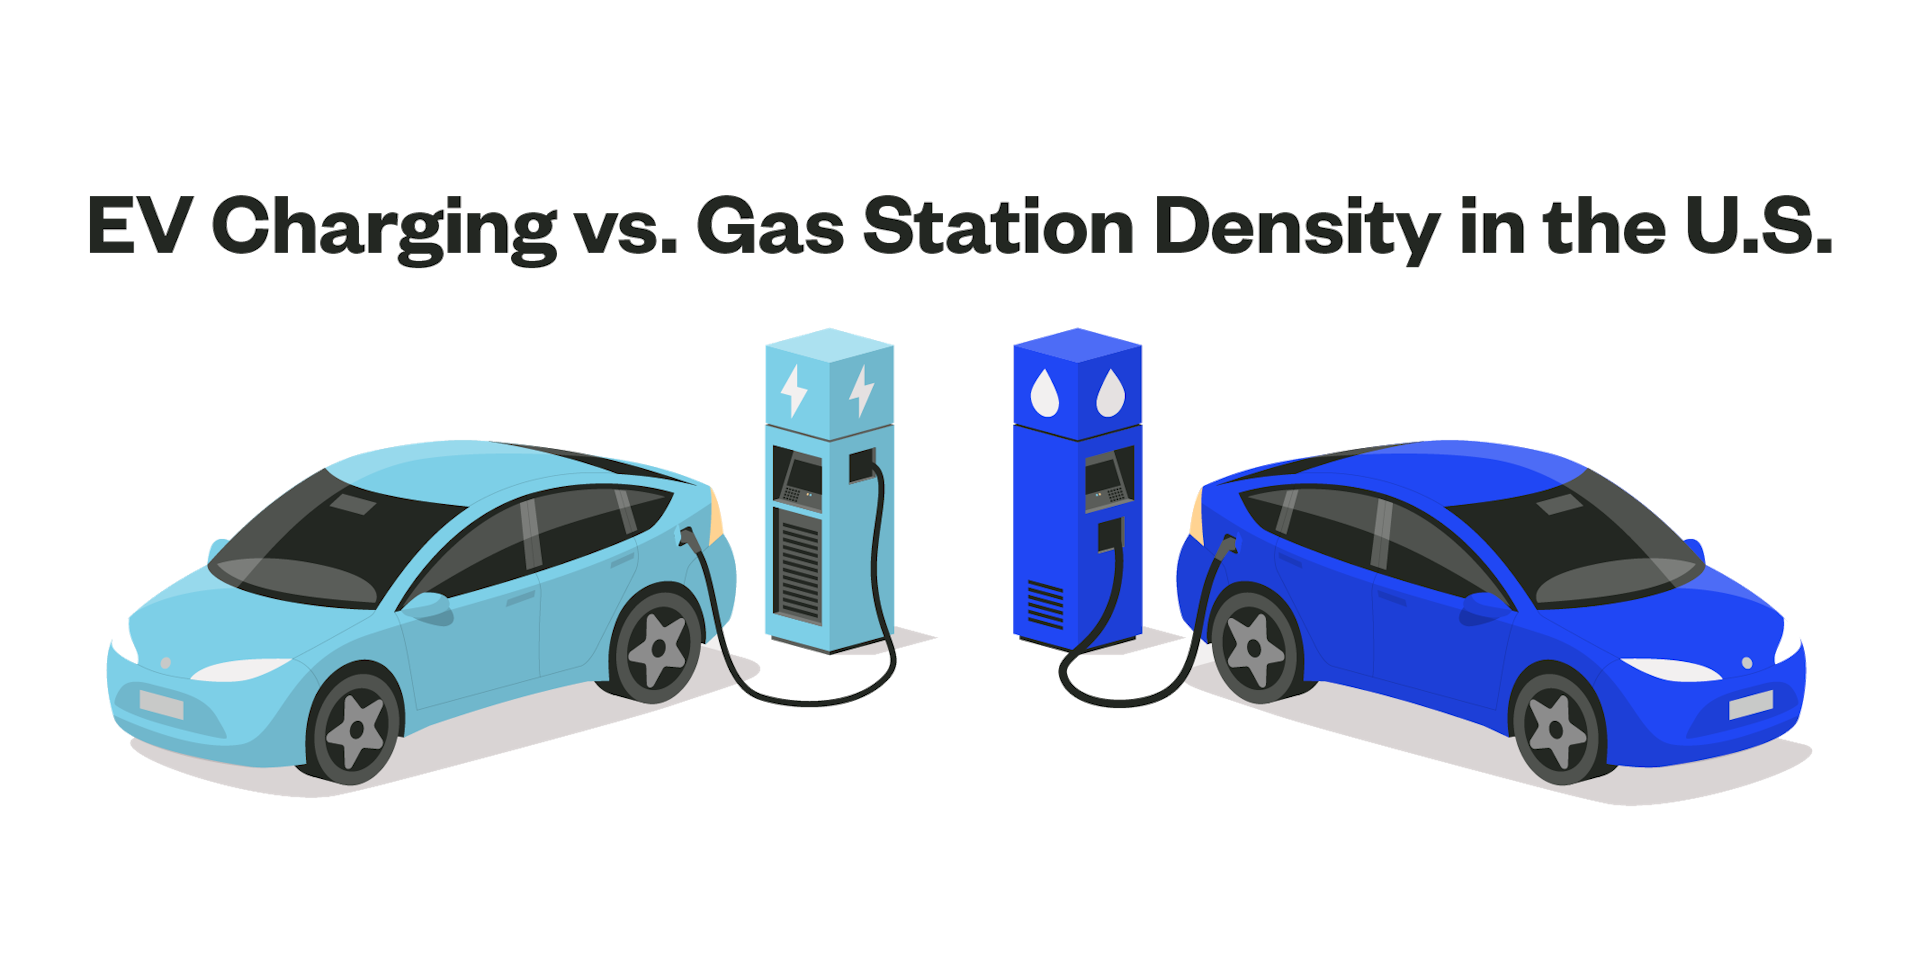 A header image for a blog that compares electric vehicle charging to gas station density state by state